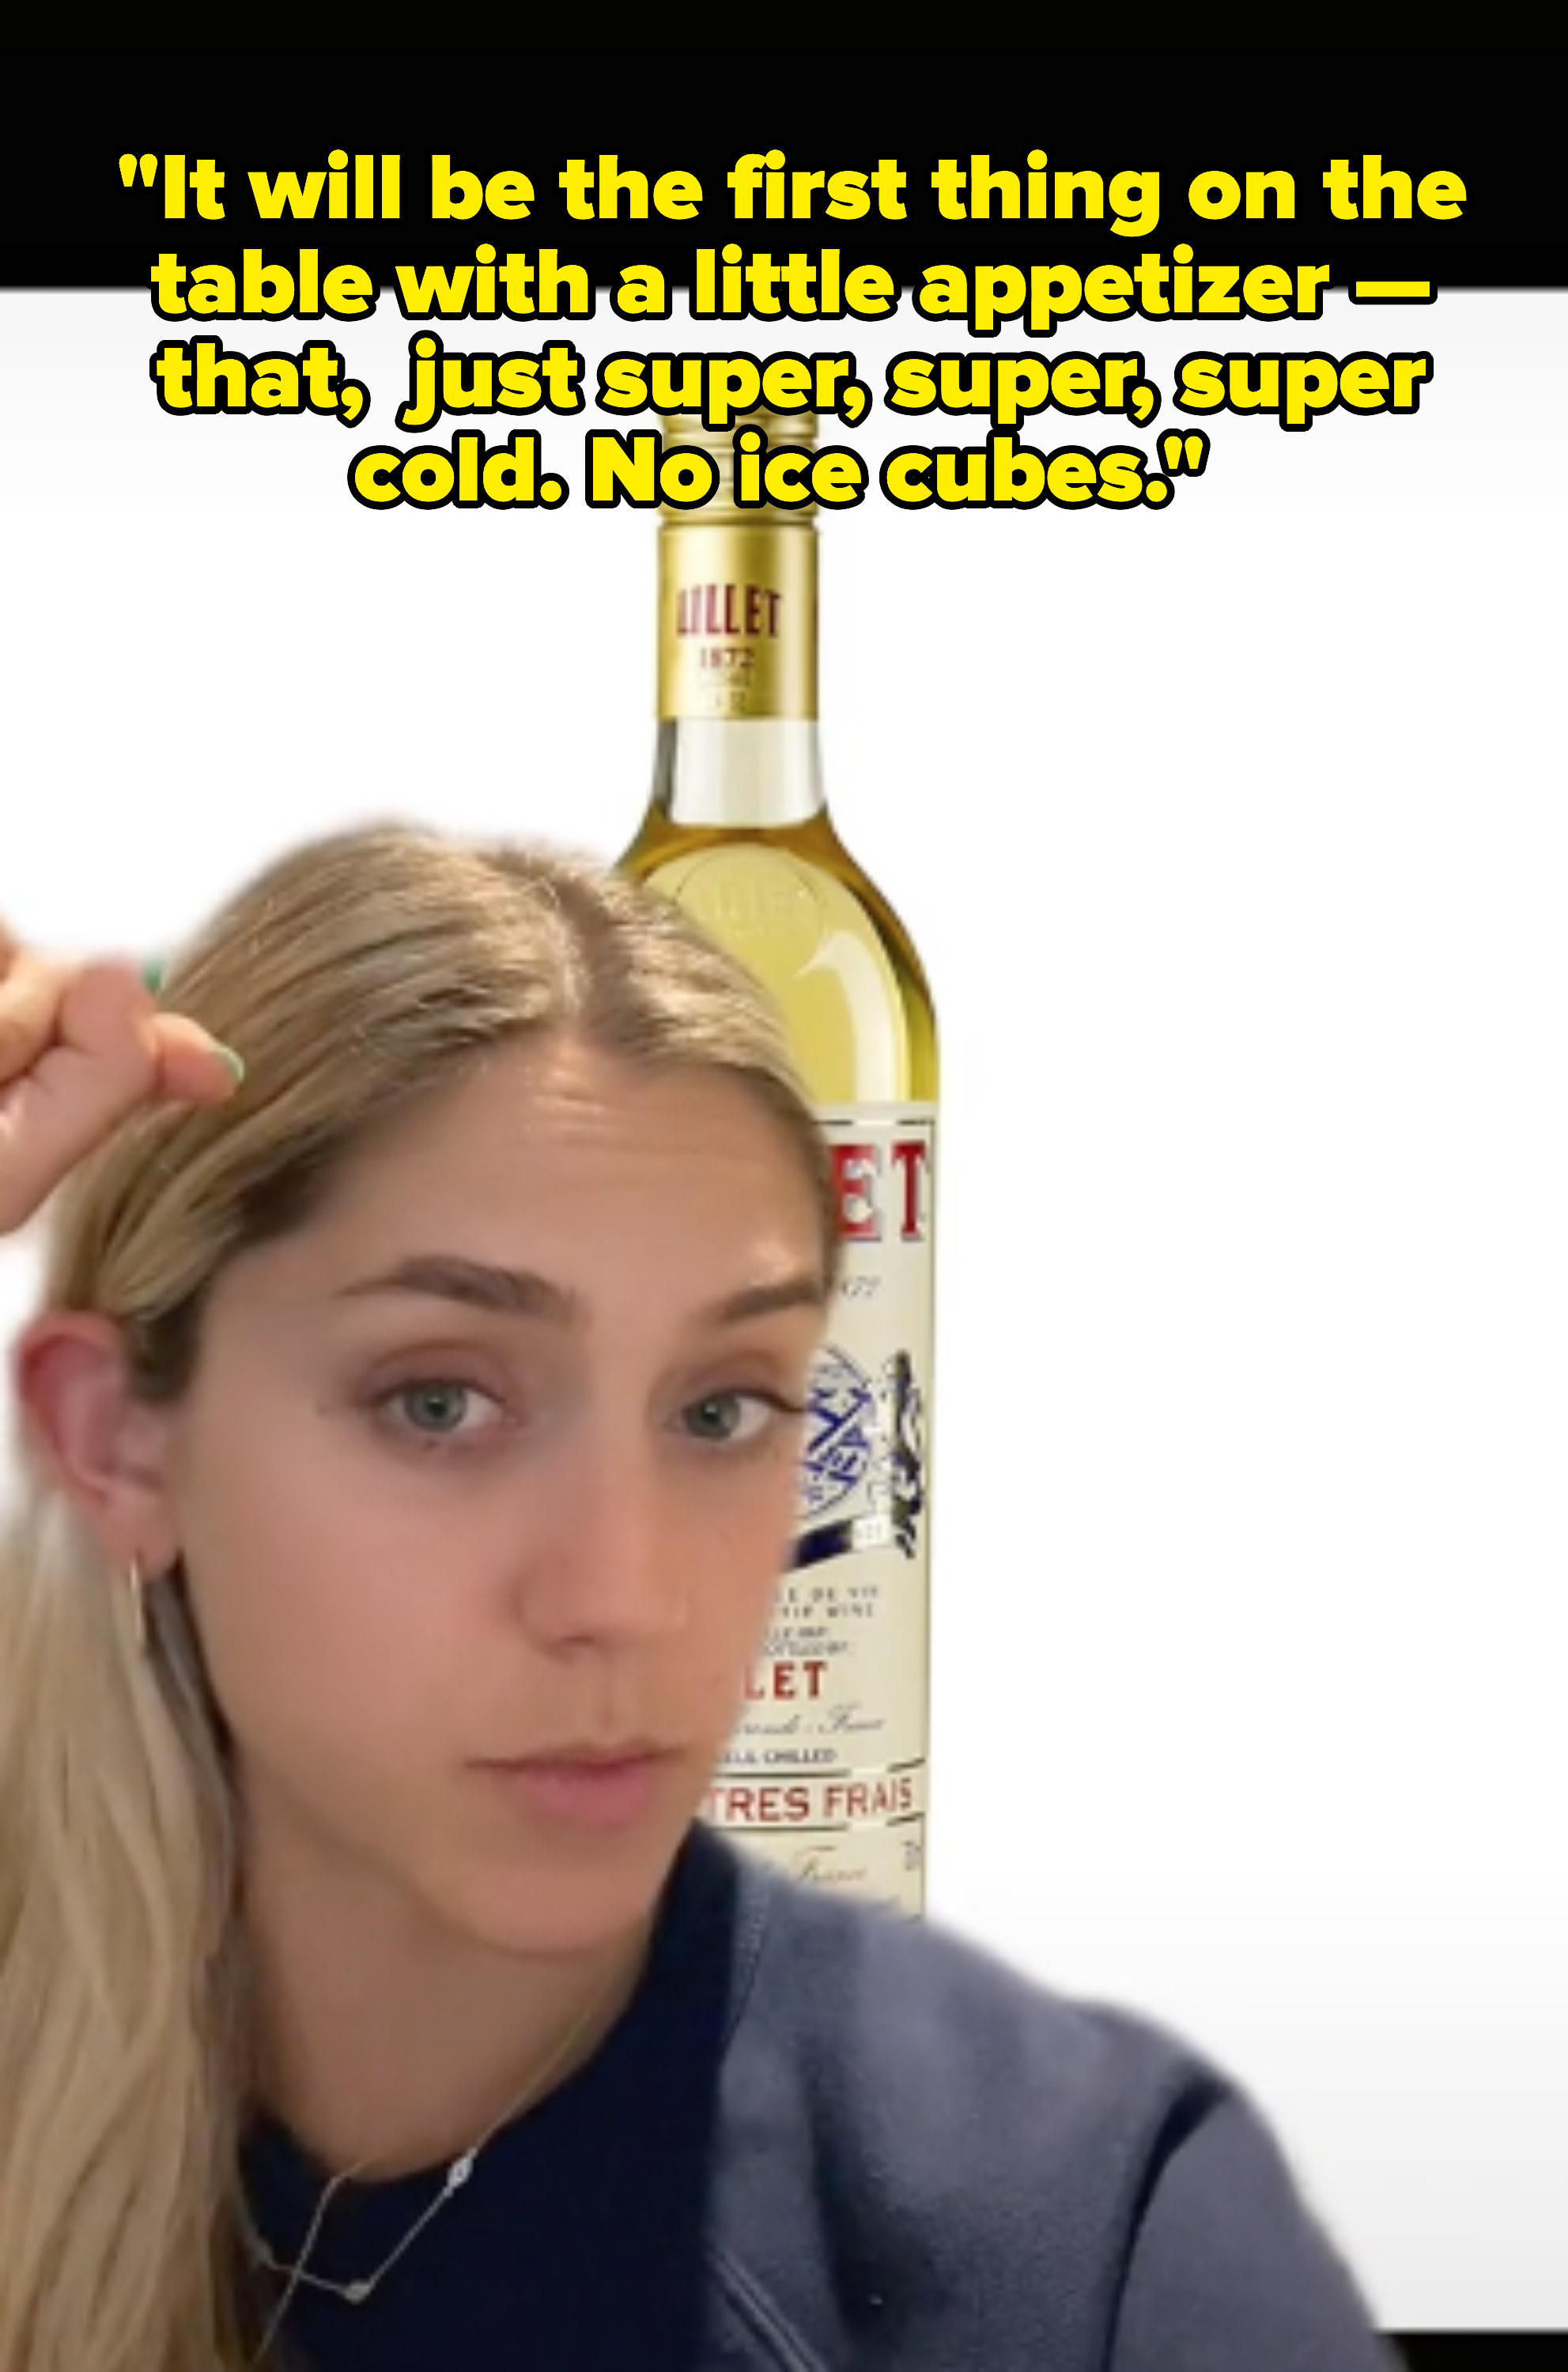 Screenshot of Claire&#x27;s TikTok with her in front of a bottle of Lillet with quote: It will be the first thing on the table with a little appetizer — that, just super, super, super cold, no ice